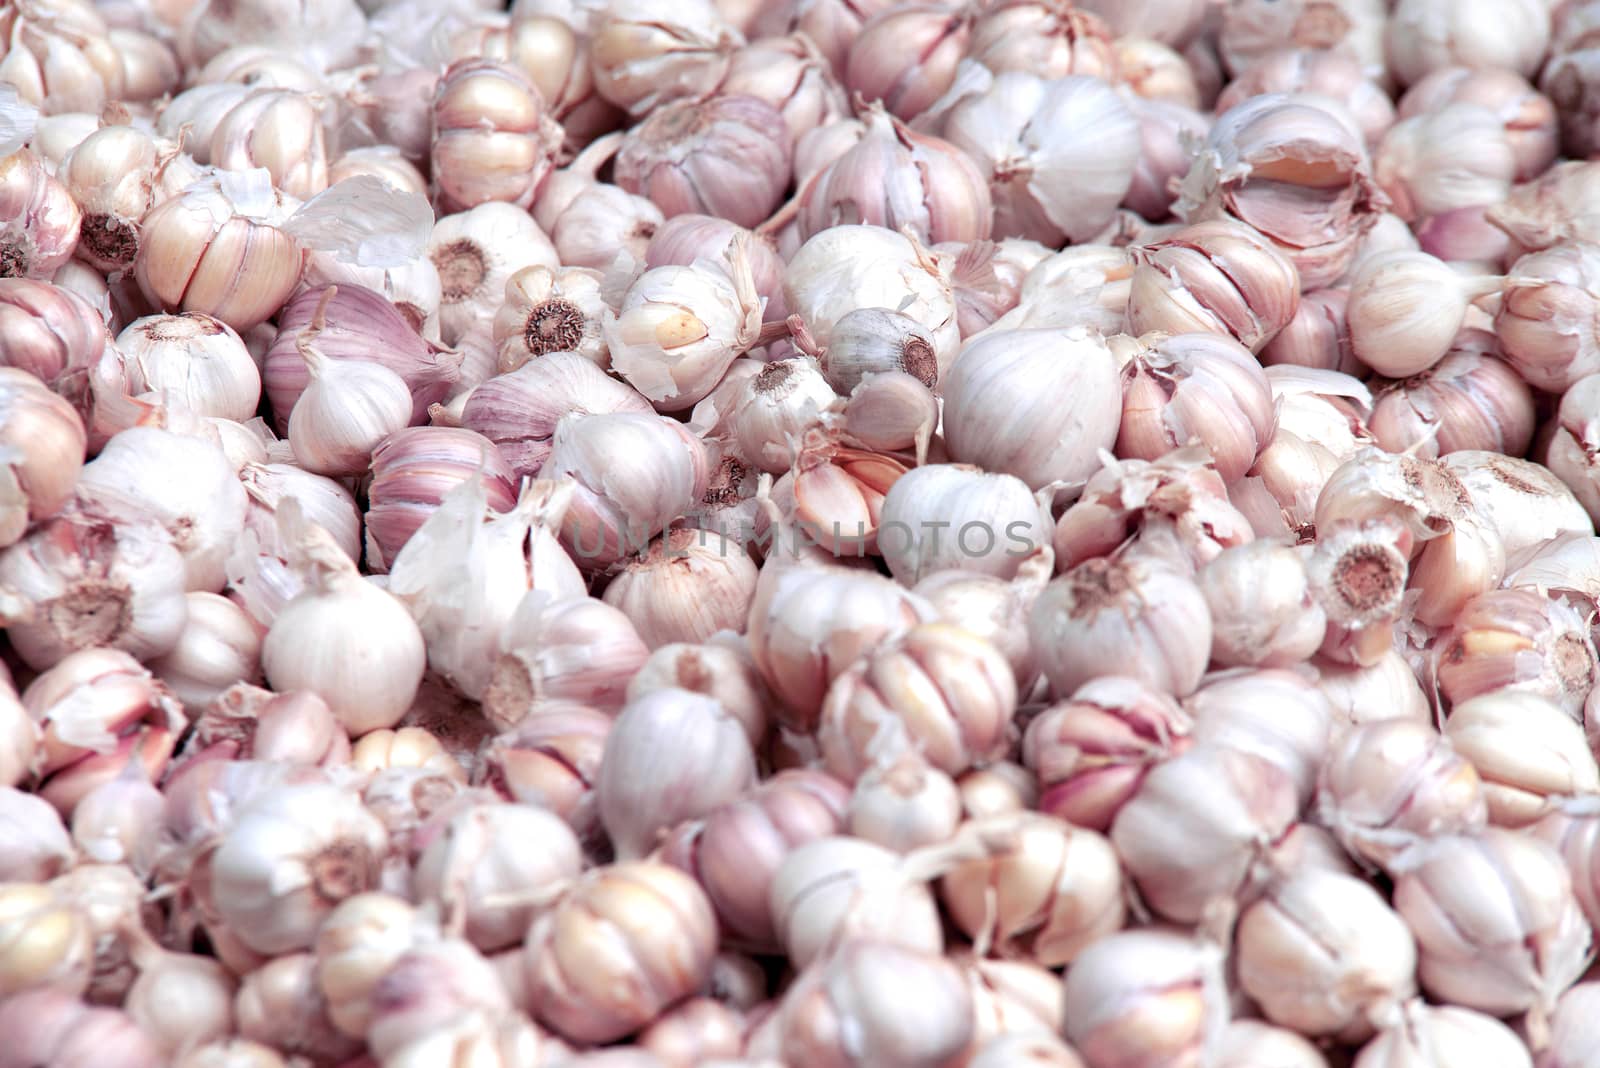 Group of garlic on market stand by jakgree